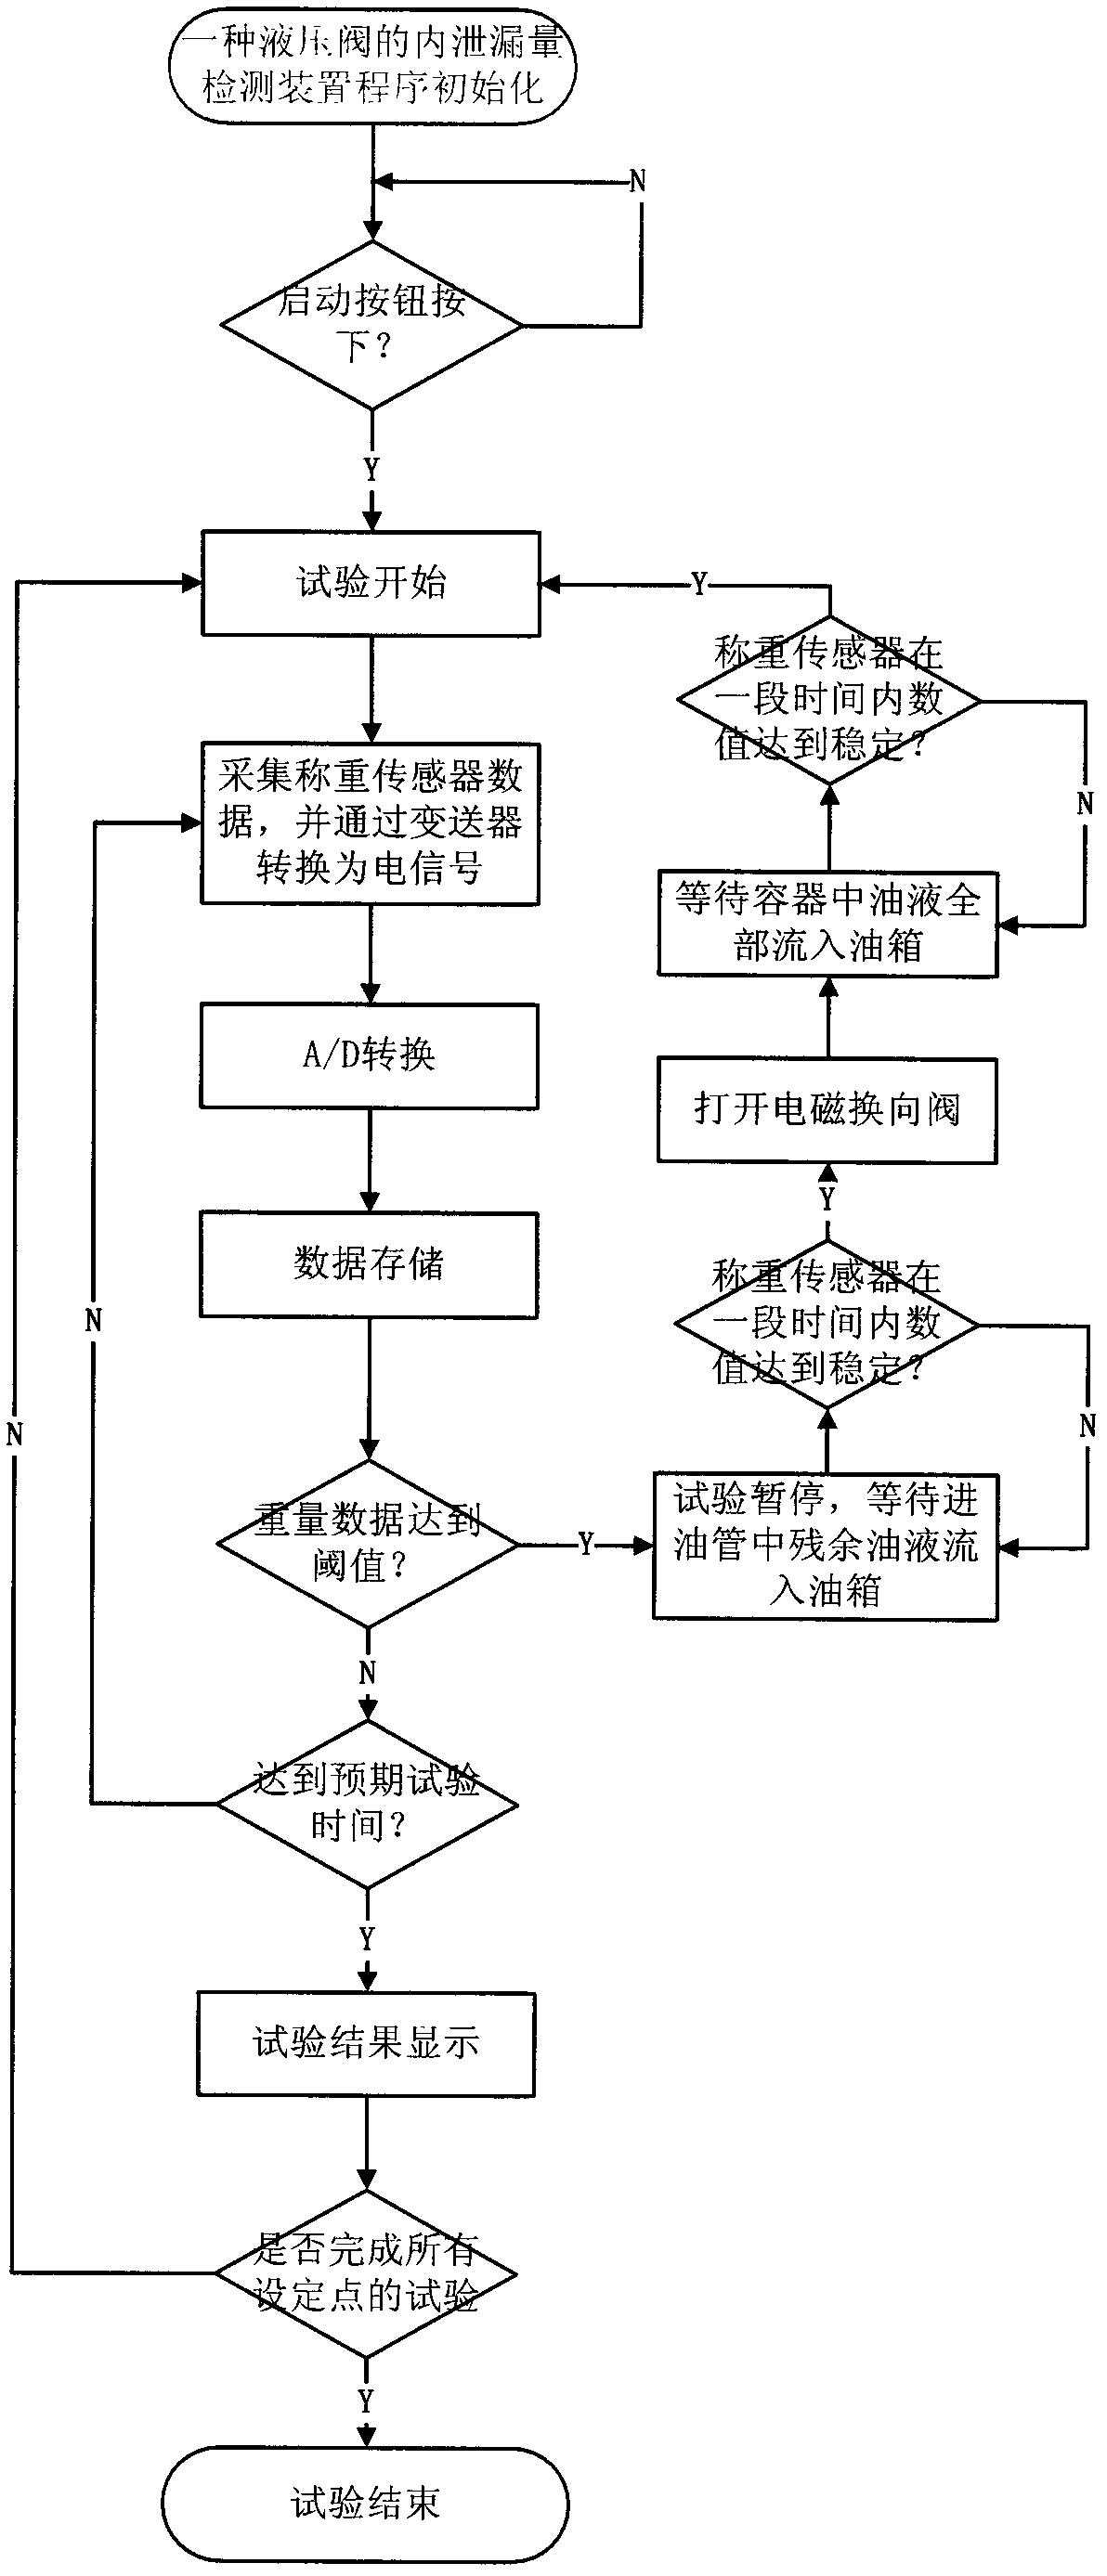 Internal leakage quantity detection device of hydraulic valves